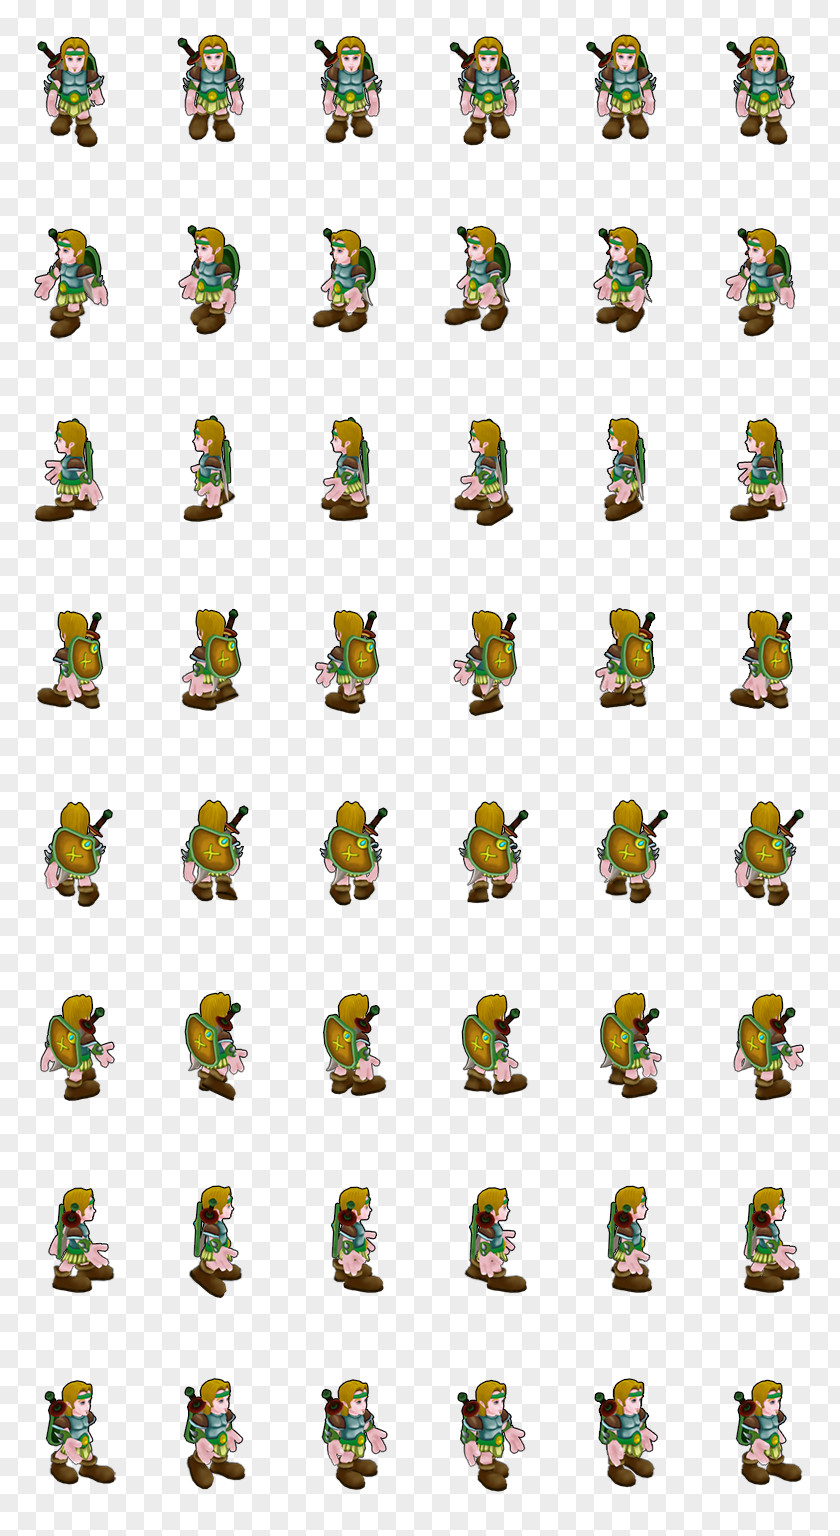 Sprite Warrior Tile-based Video Game Isometric Graphics In Games And Pixel Art Line Font PNG